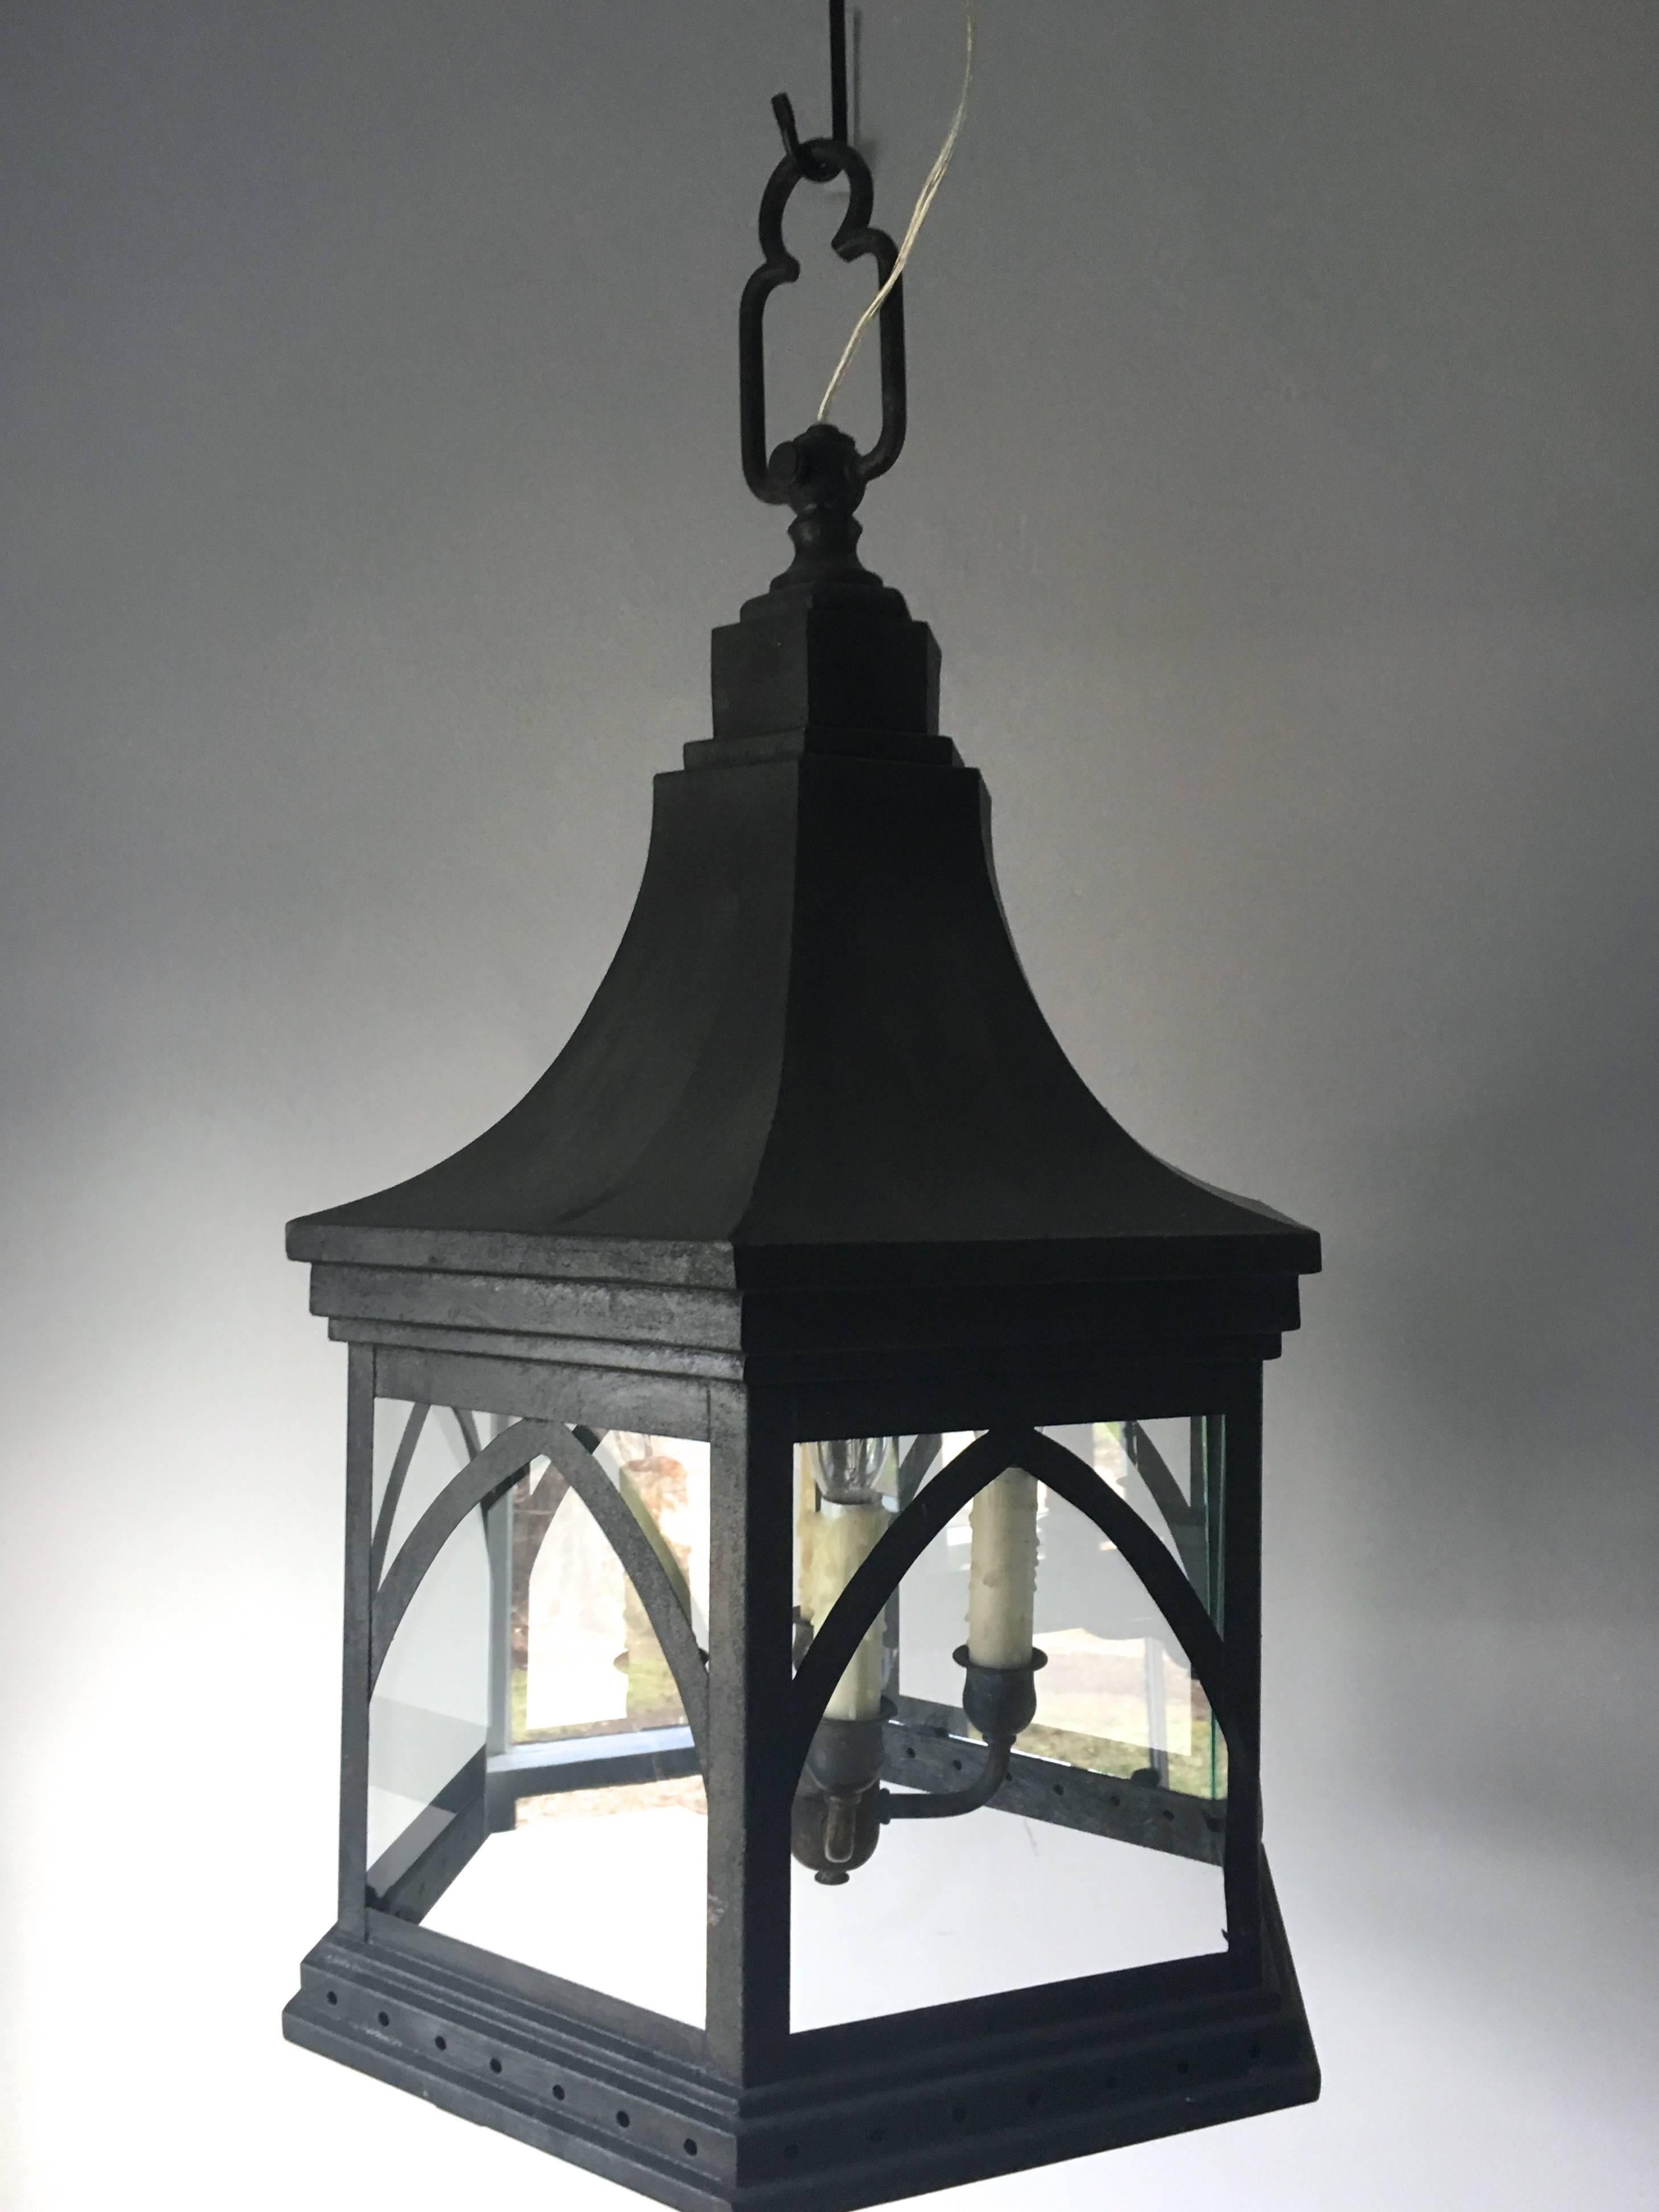 This pair of hexagonal steel lanterns is flat-out stunning and rare in form, the real deal, and out of a posh London flat. We have totally redone them, adding lighting clusters (each with four sockets; 300 watts max each lantern), new wiring, new